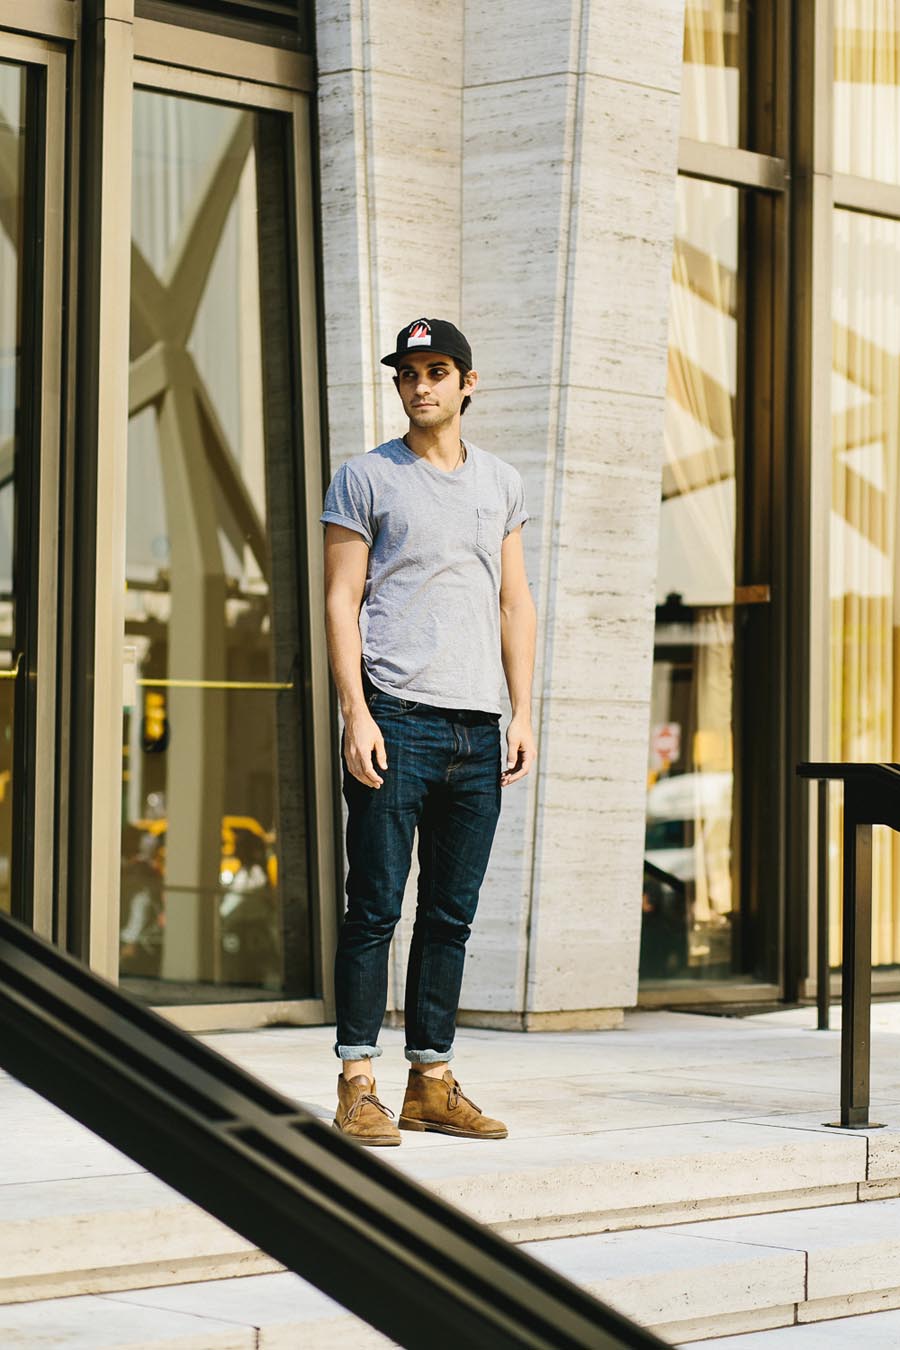 Jace, Lincoln Center NYC dark jeans #streetstyle